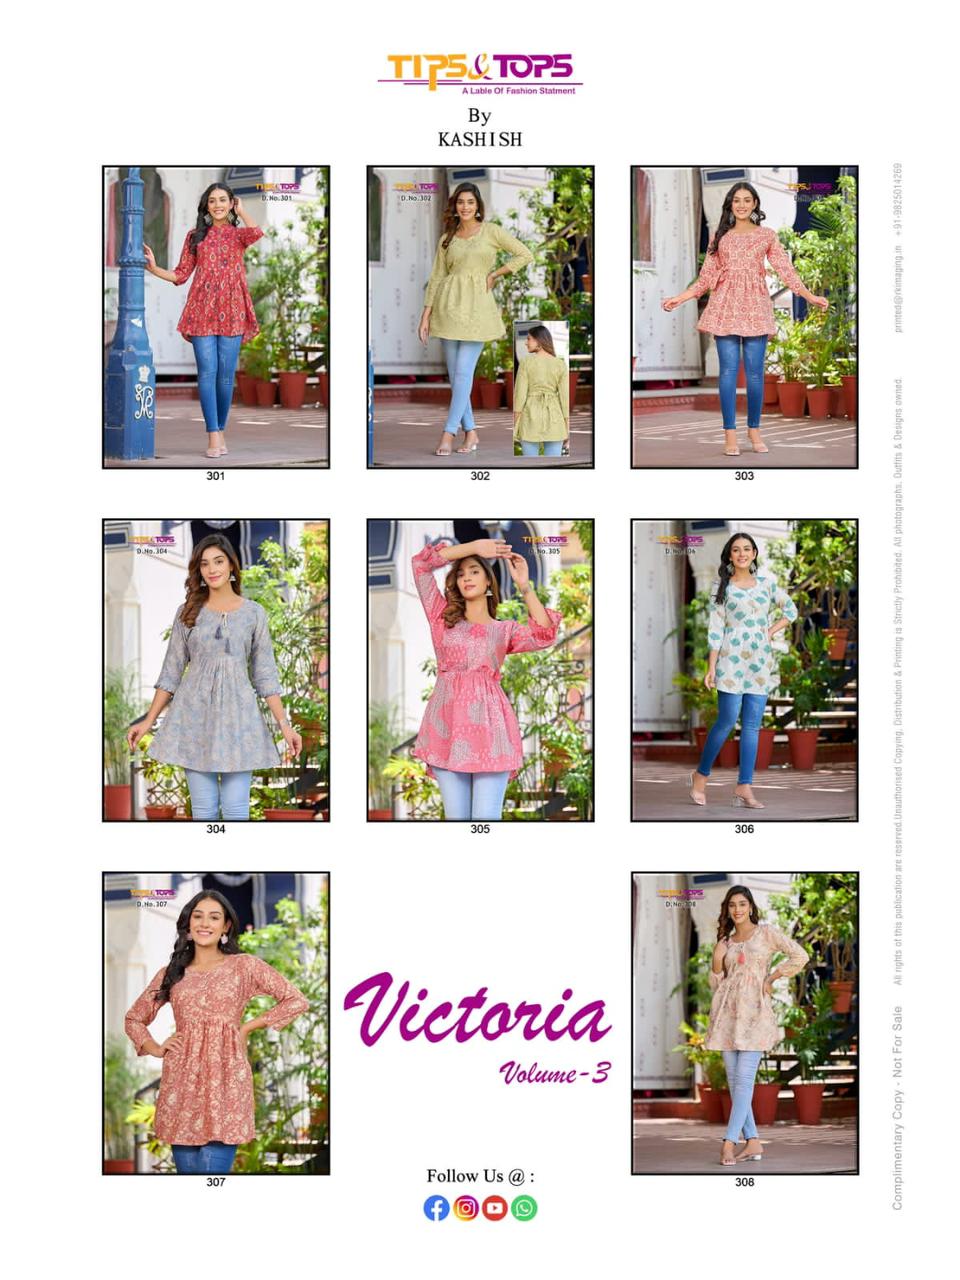 Tips And Tops Victoria Vol 3 collection 2